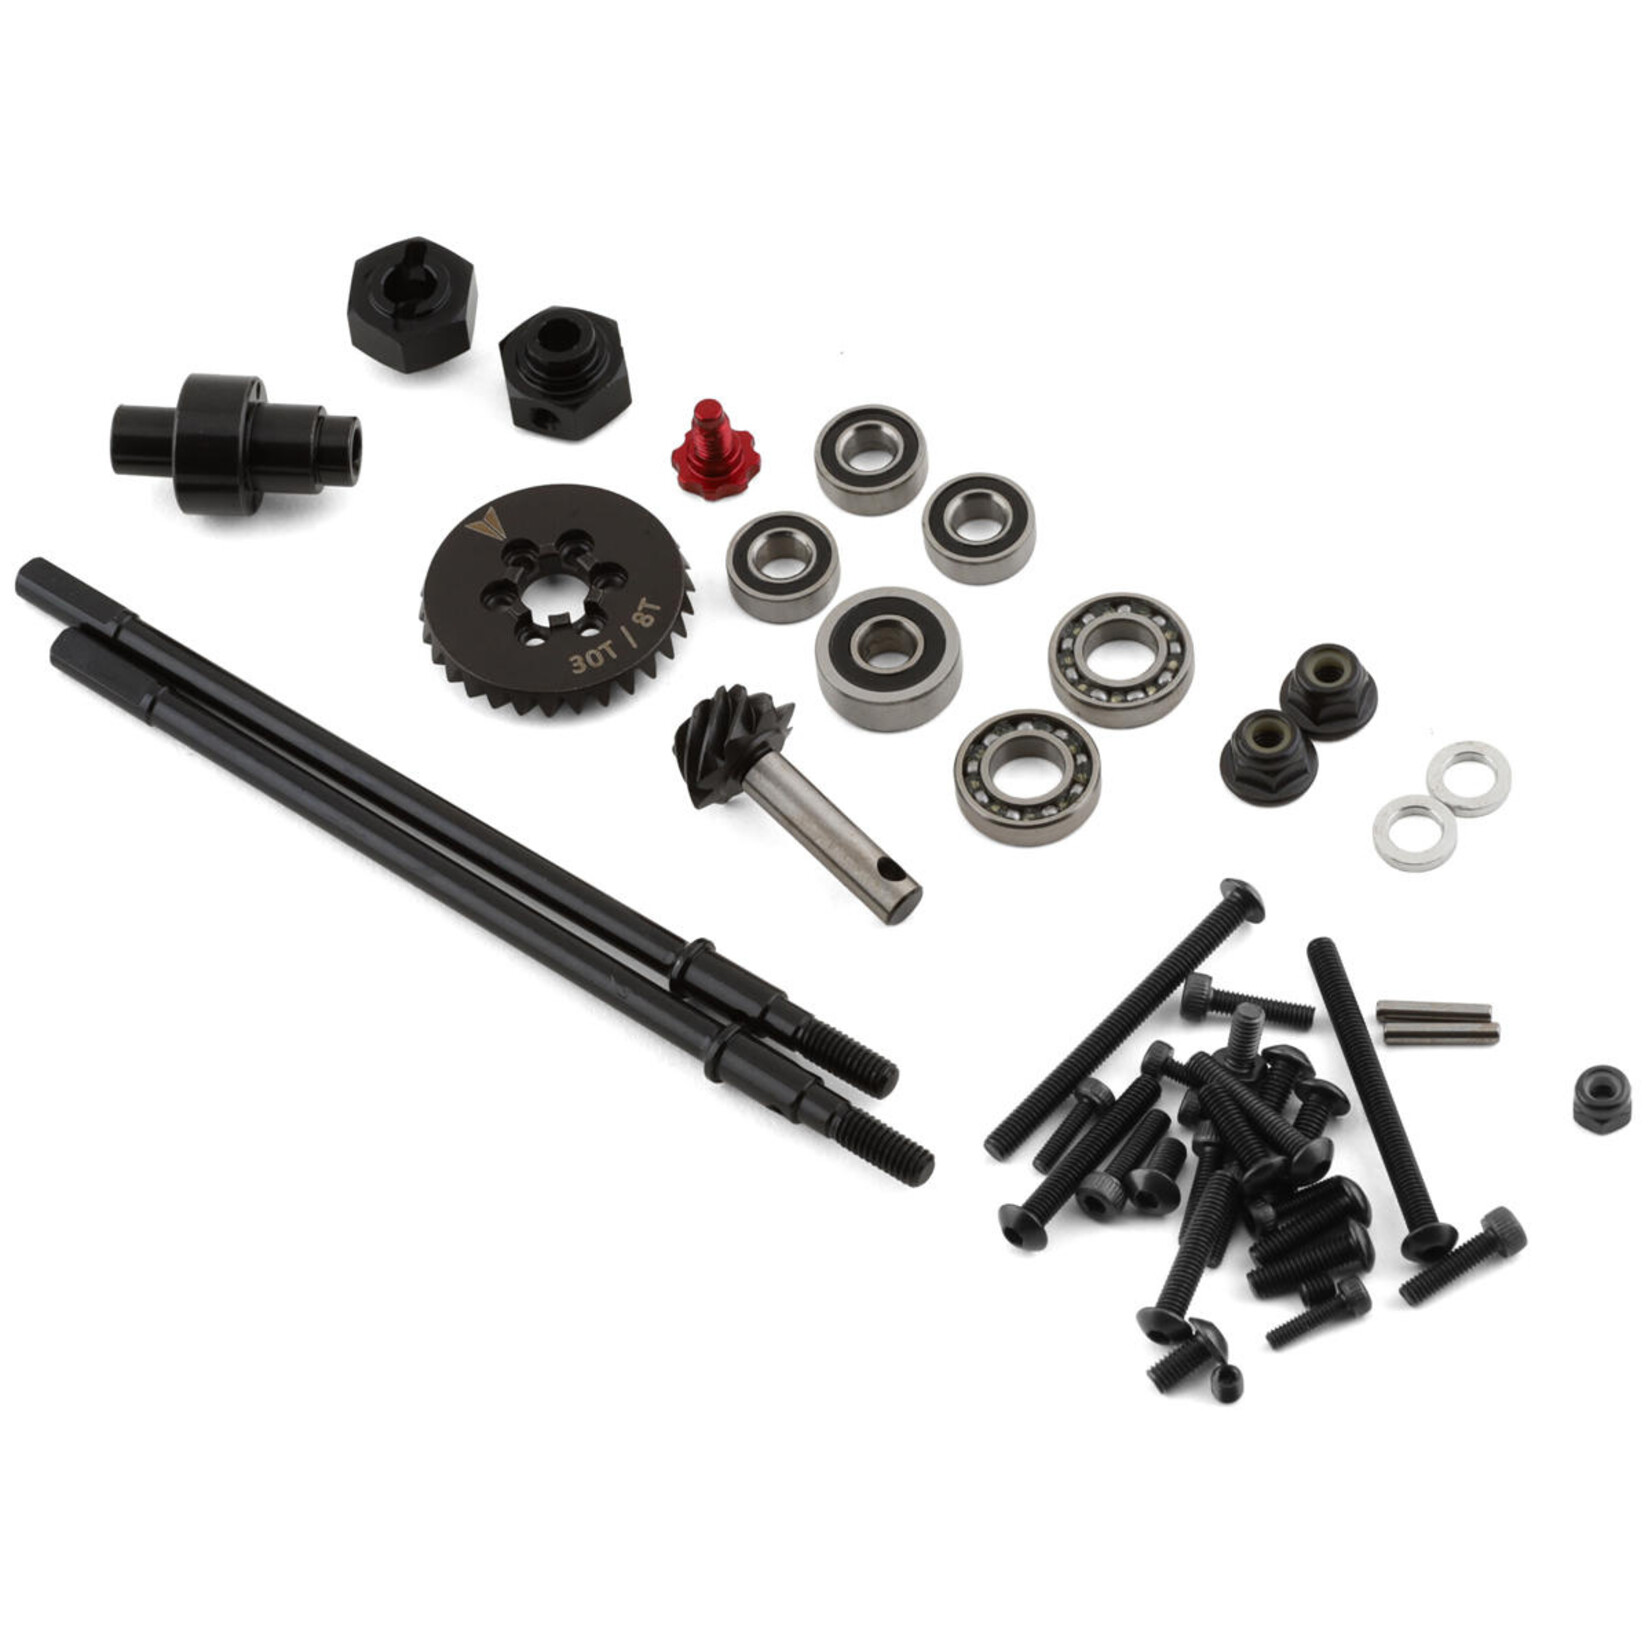 Vanquish Products Vanquish Products F10 Straight Rear Axle Set #VPS08603